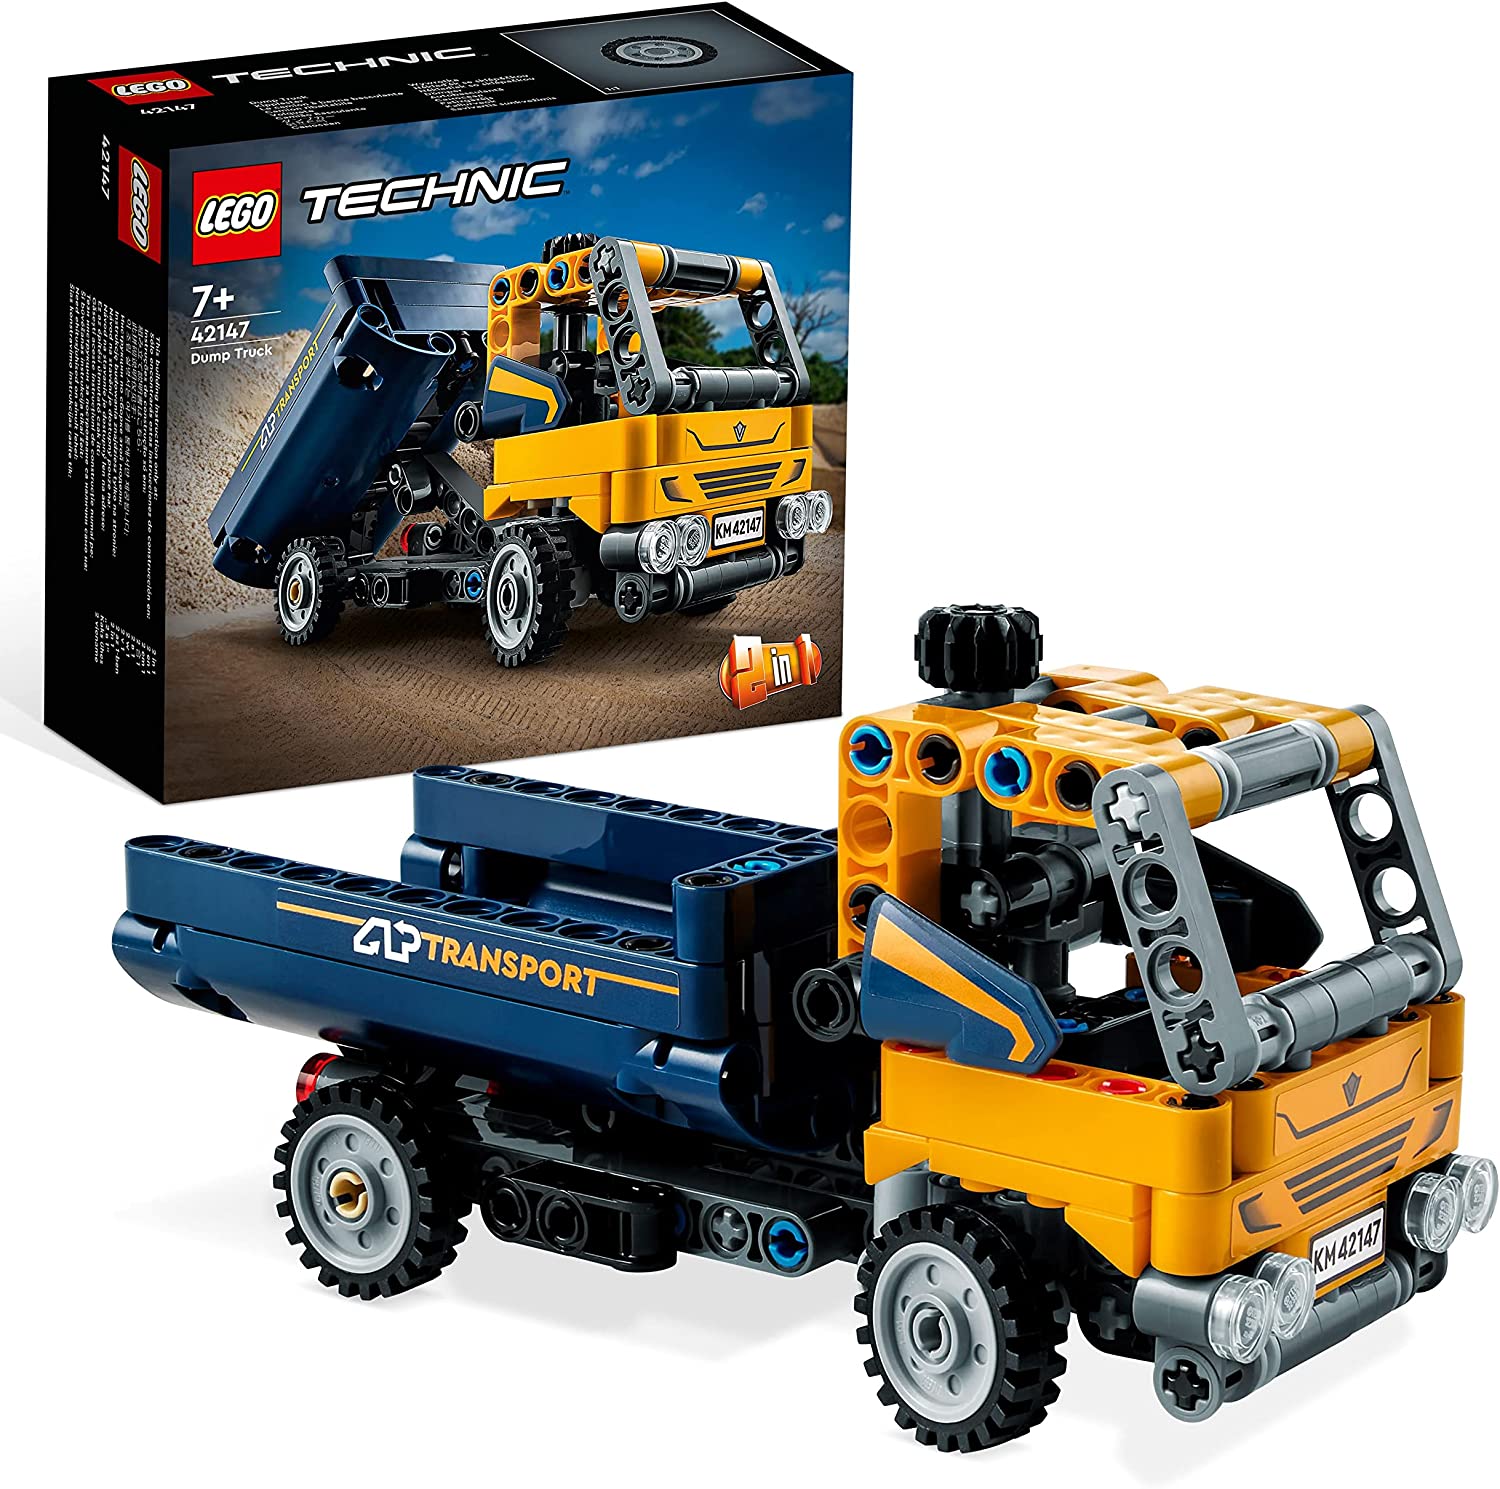 LEGO 42147 Technic Dump Truck Toy, 2-in-1 Set with Construction Model and Excavator Toy, Technical Gift for Boys and Girls from 7 Years